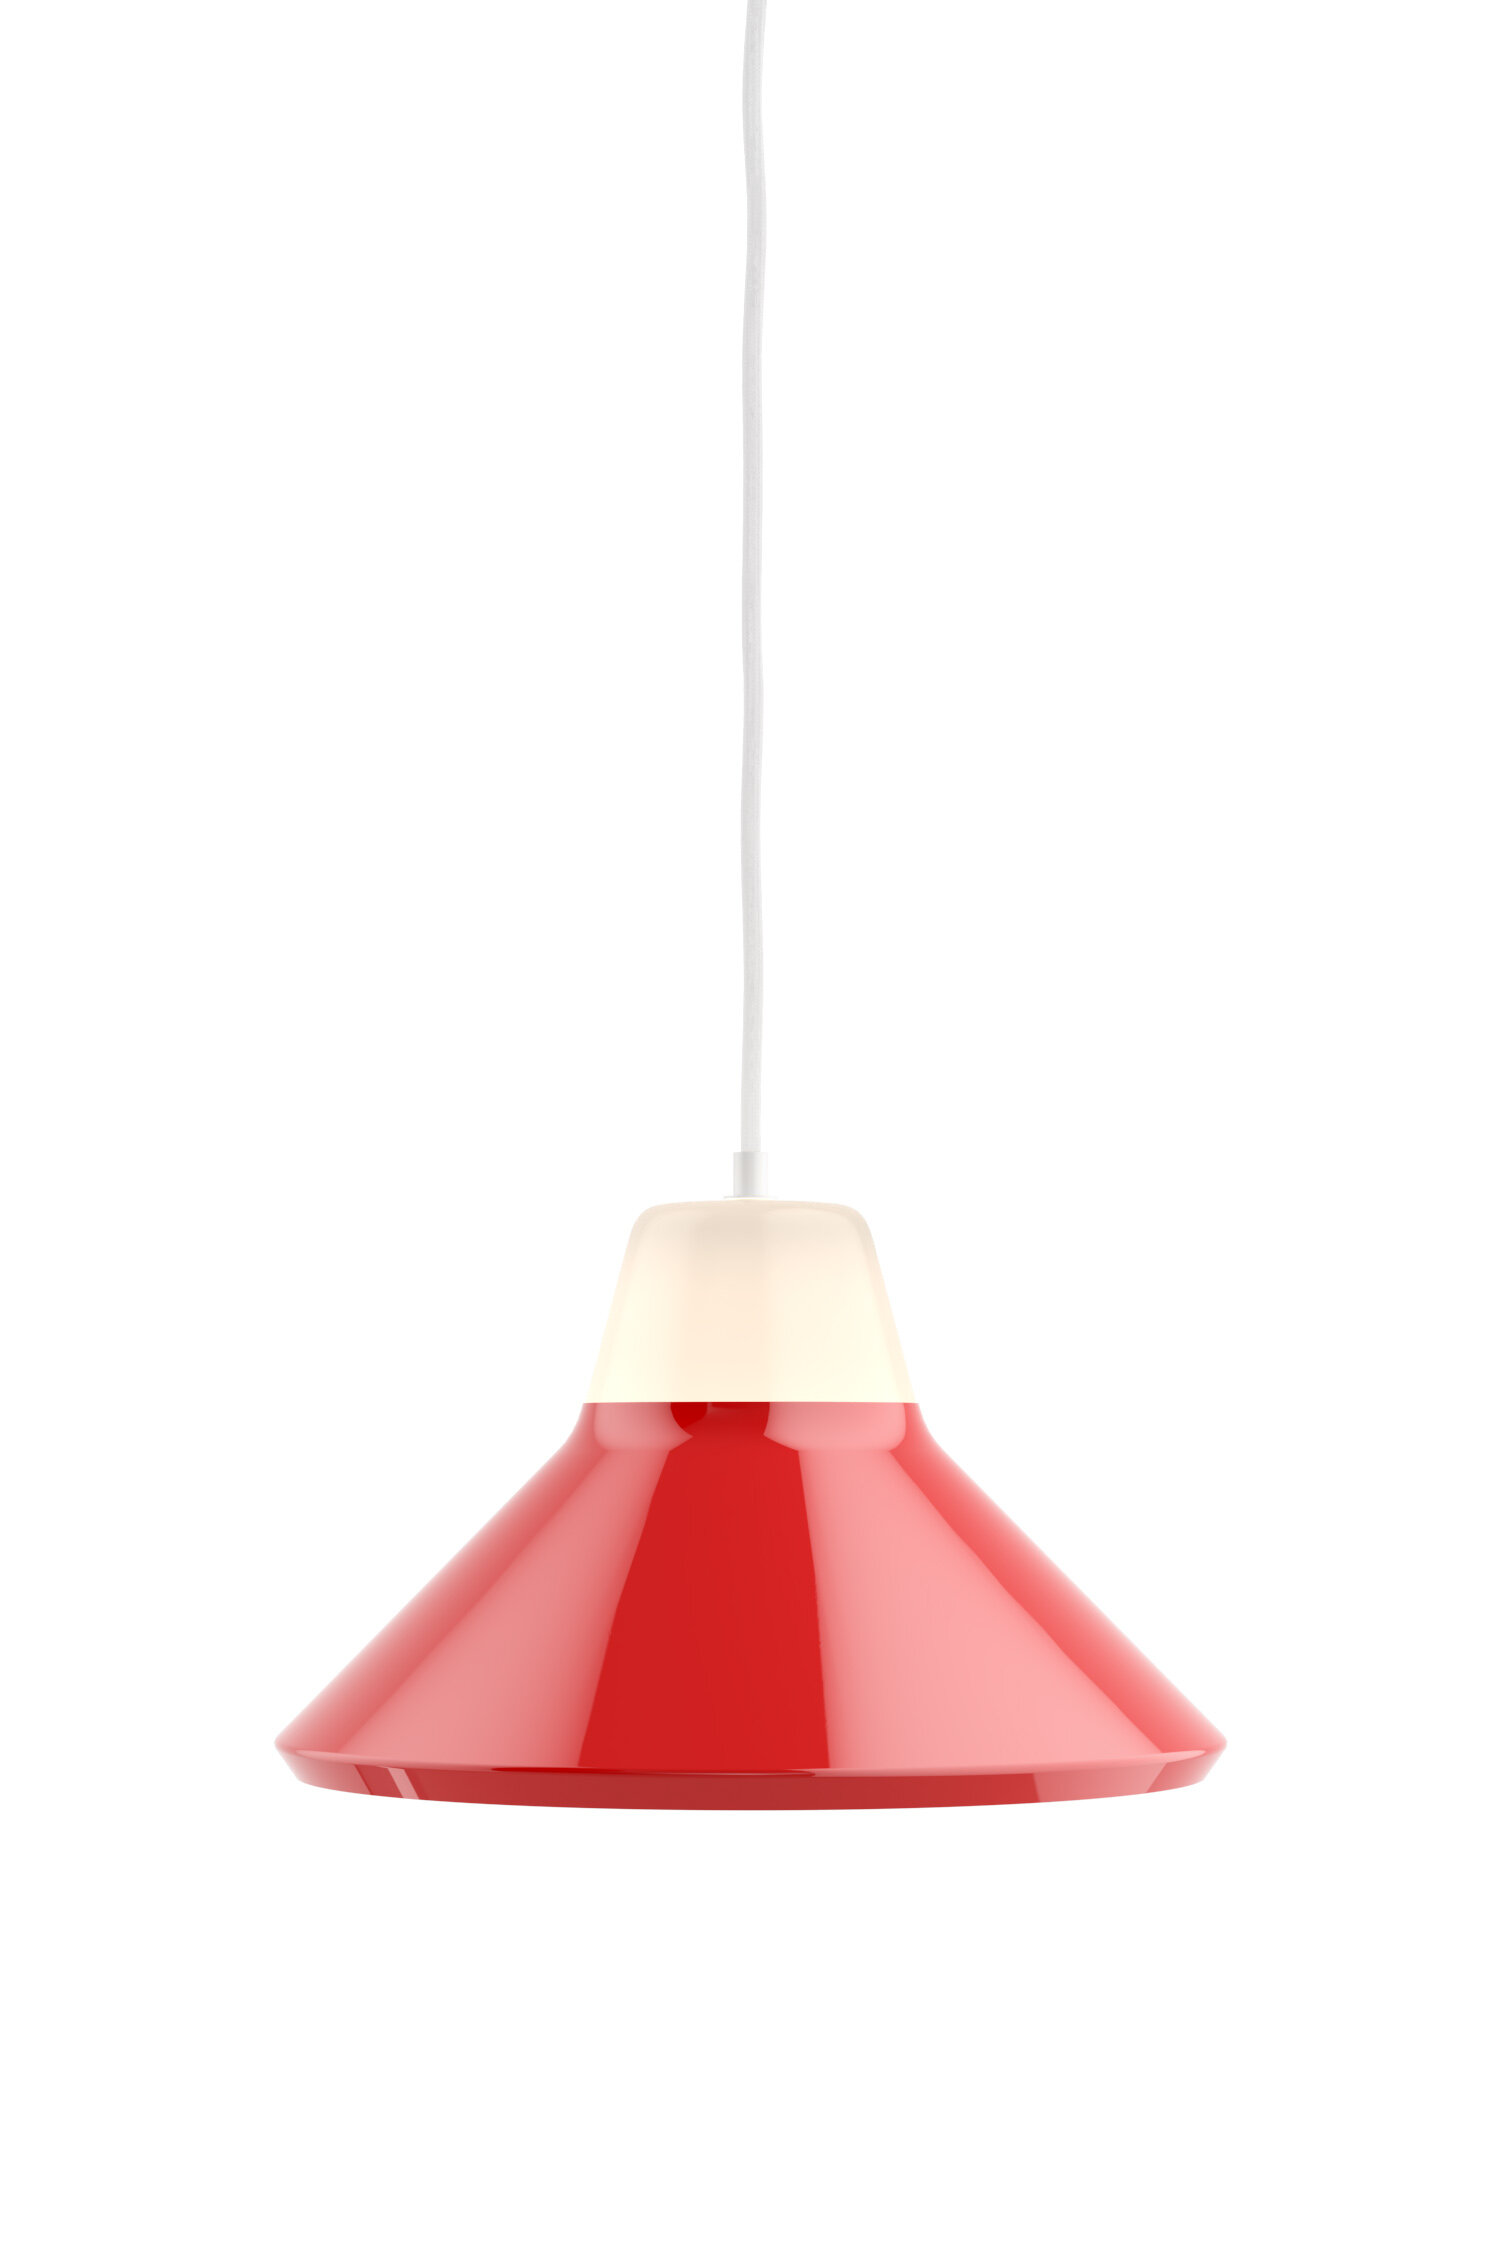 teo-icon-pendant-red-on-cutout.jpg